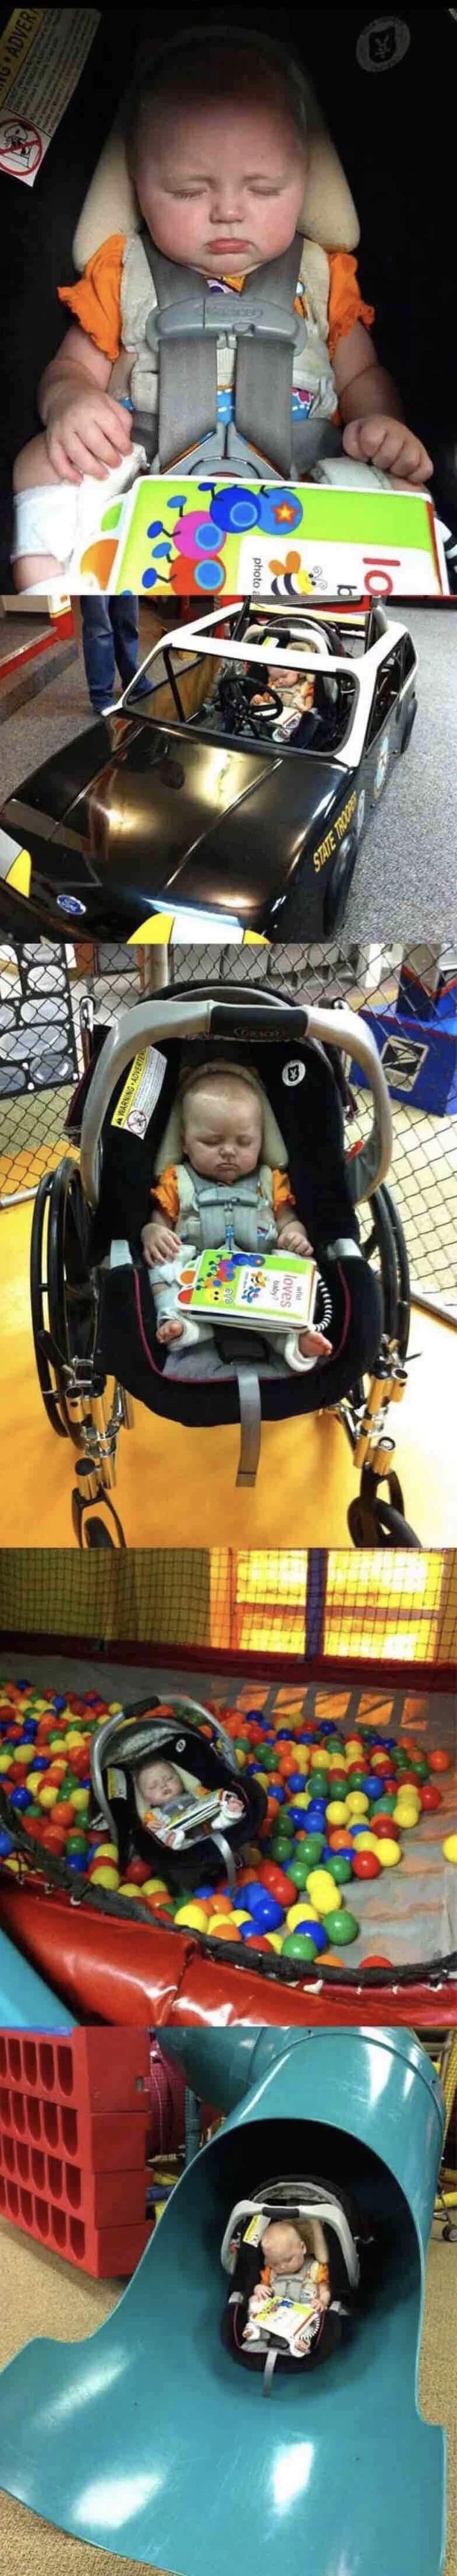 Took kids to Children’s Museum. My five month old fell asleep before we got there but we didn’t let that stop her from having a BLAST